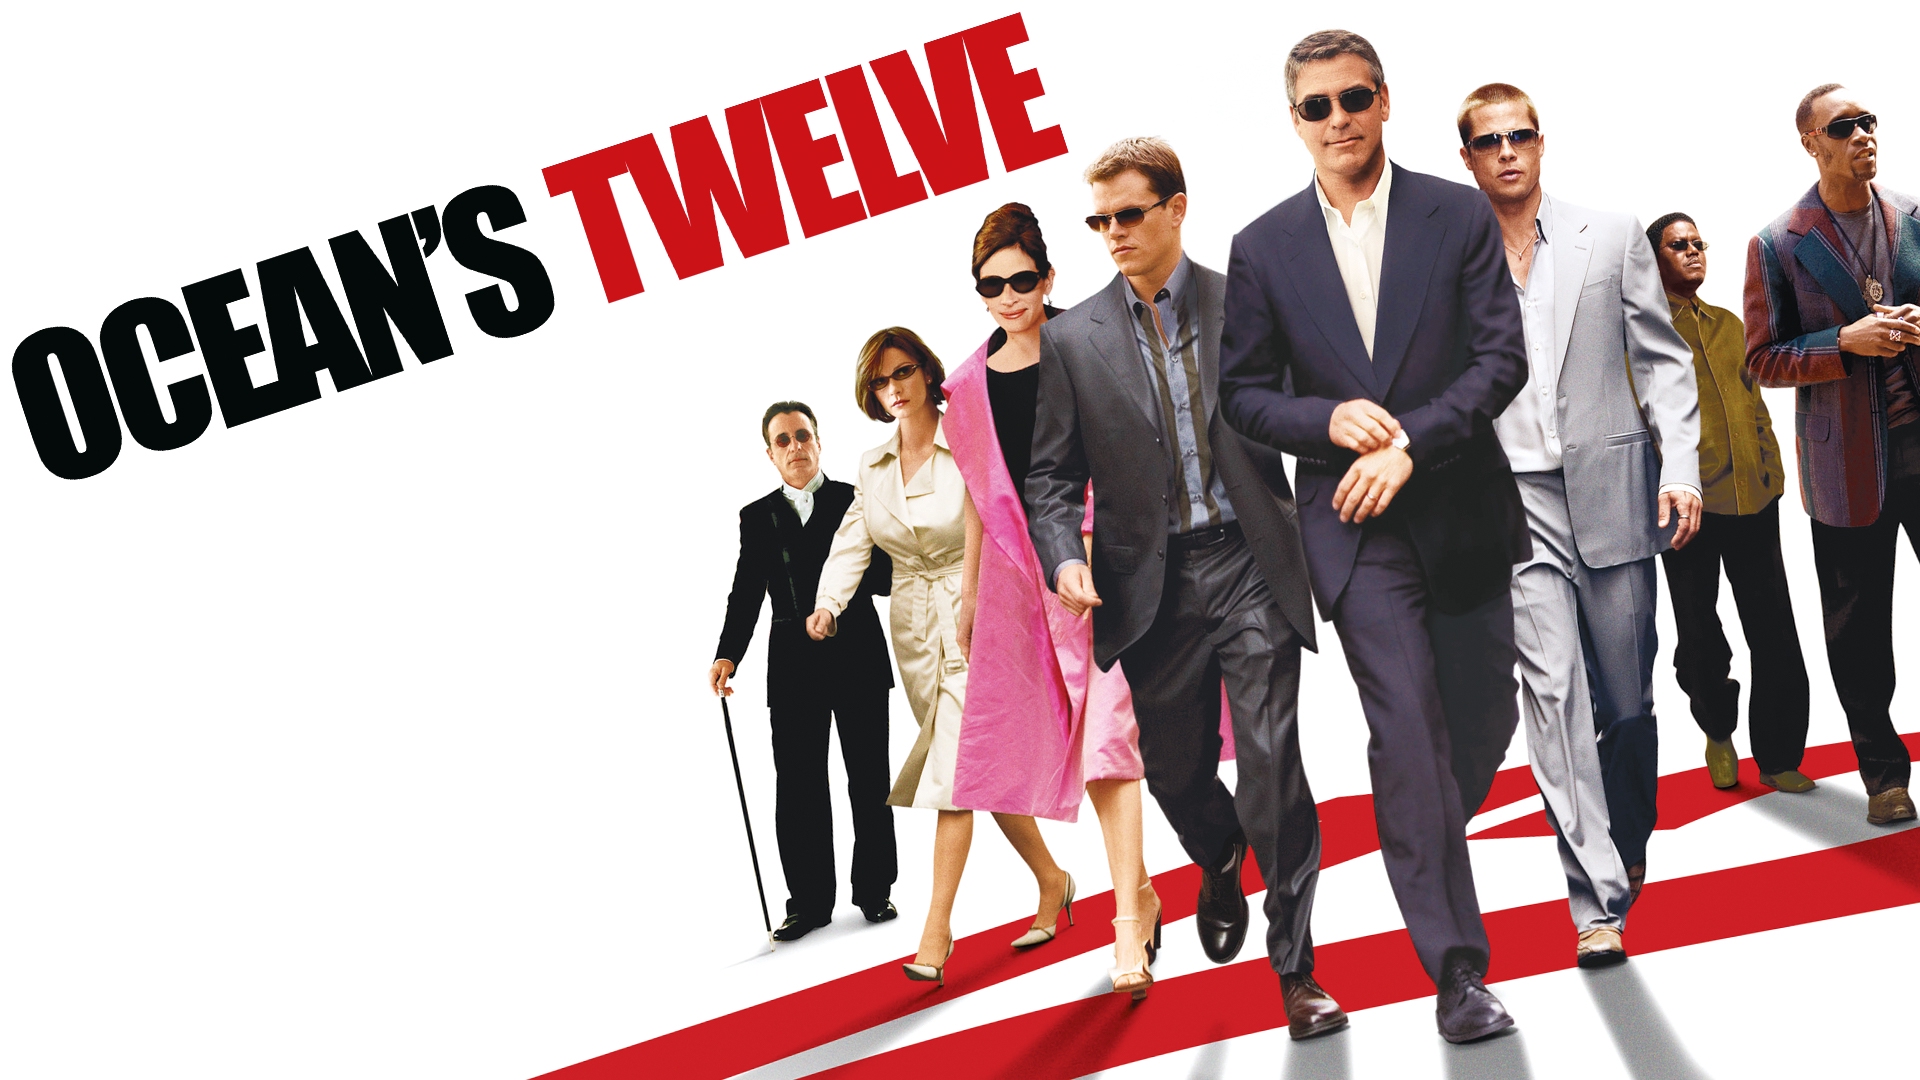 35-facts-about-the-movie-oceans-twelve